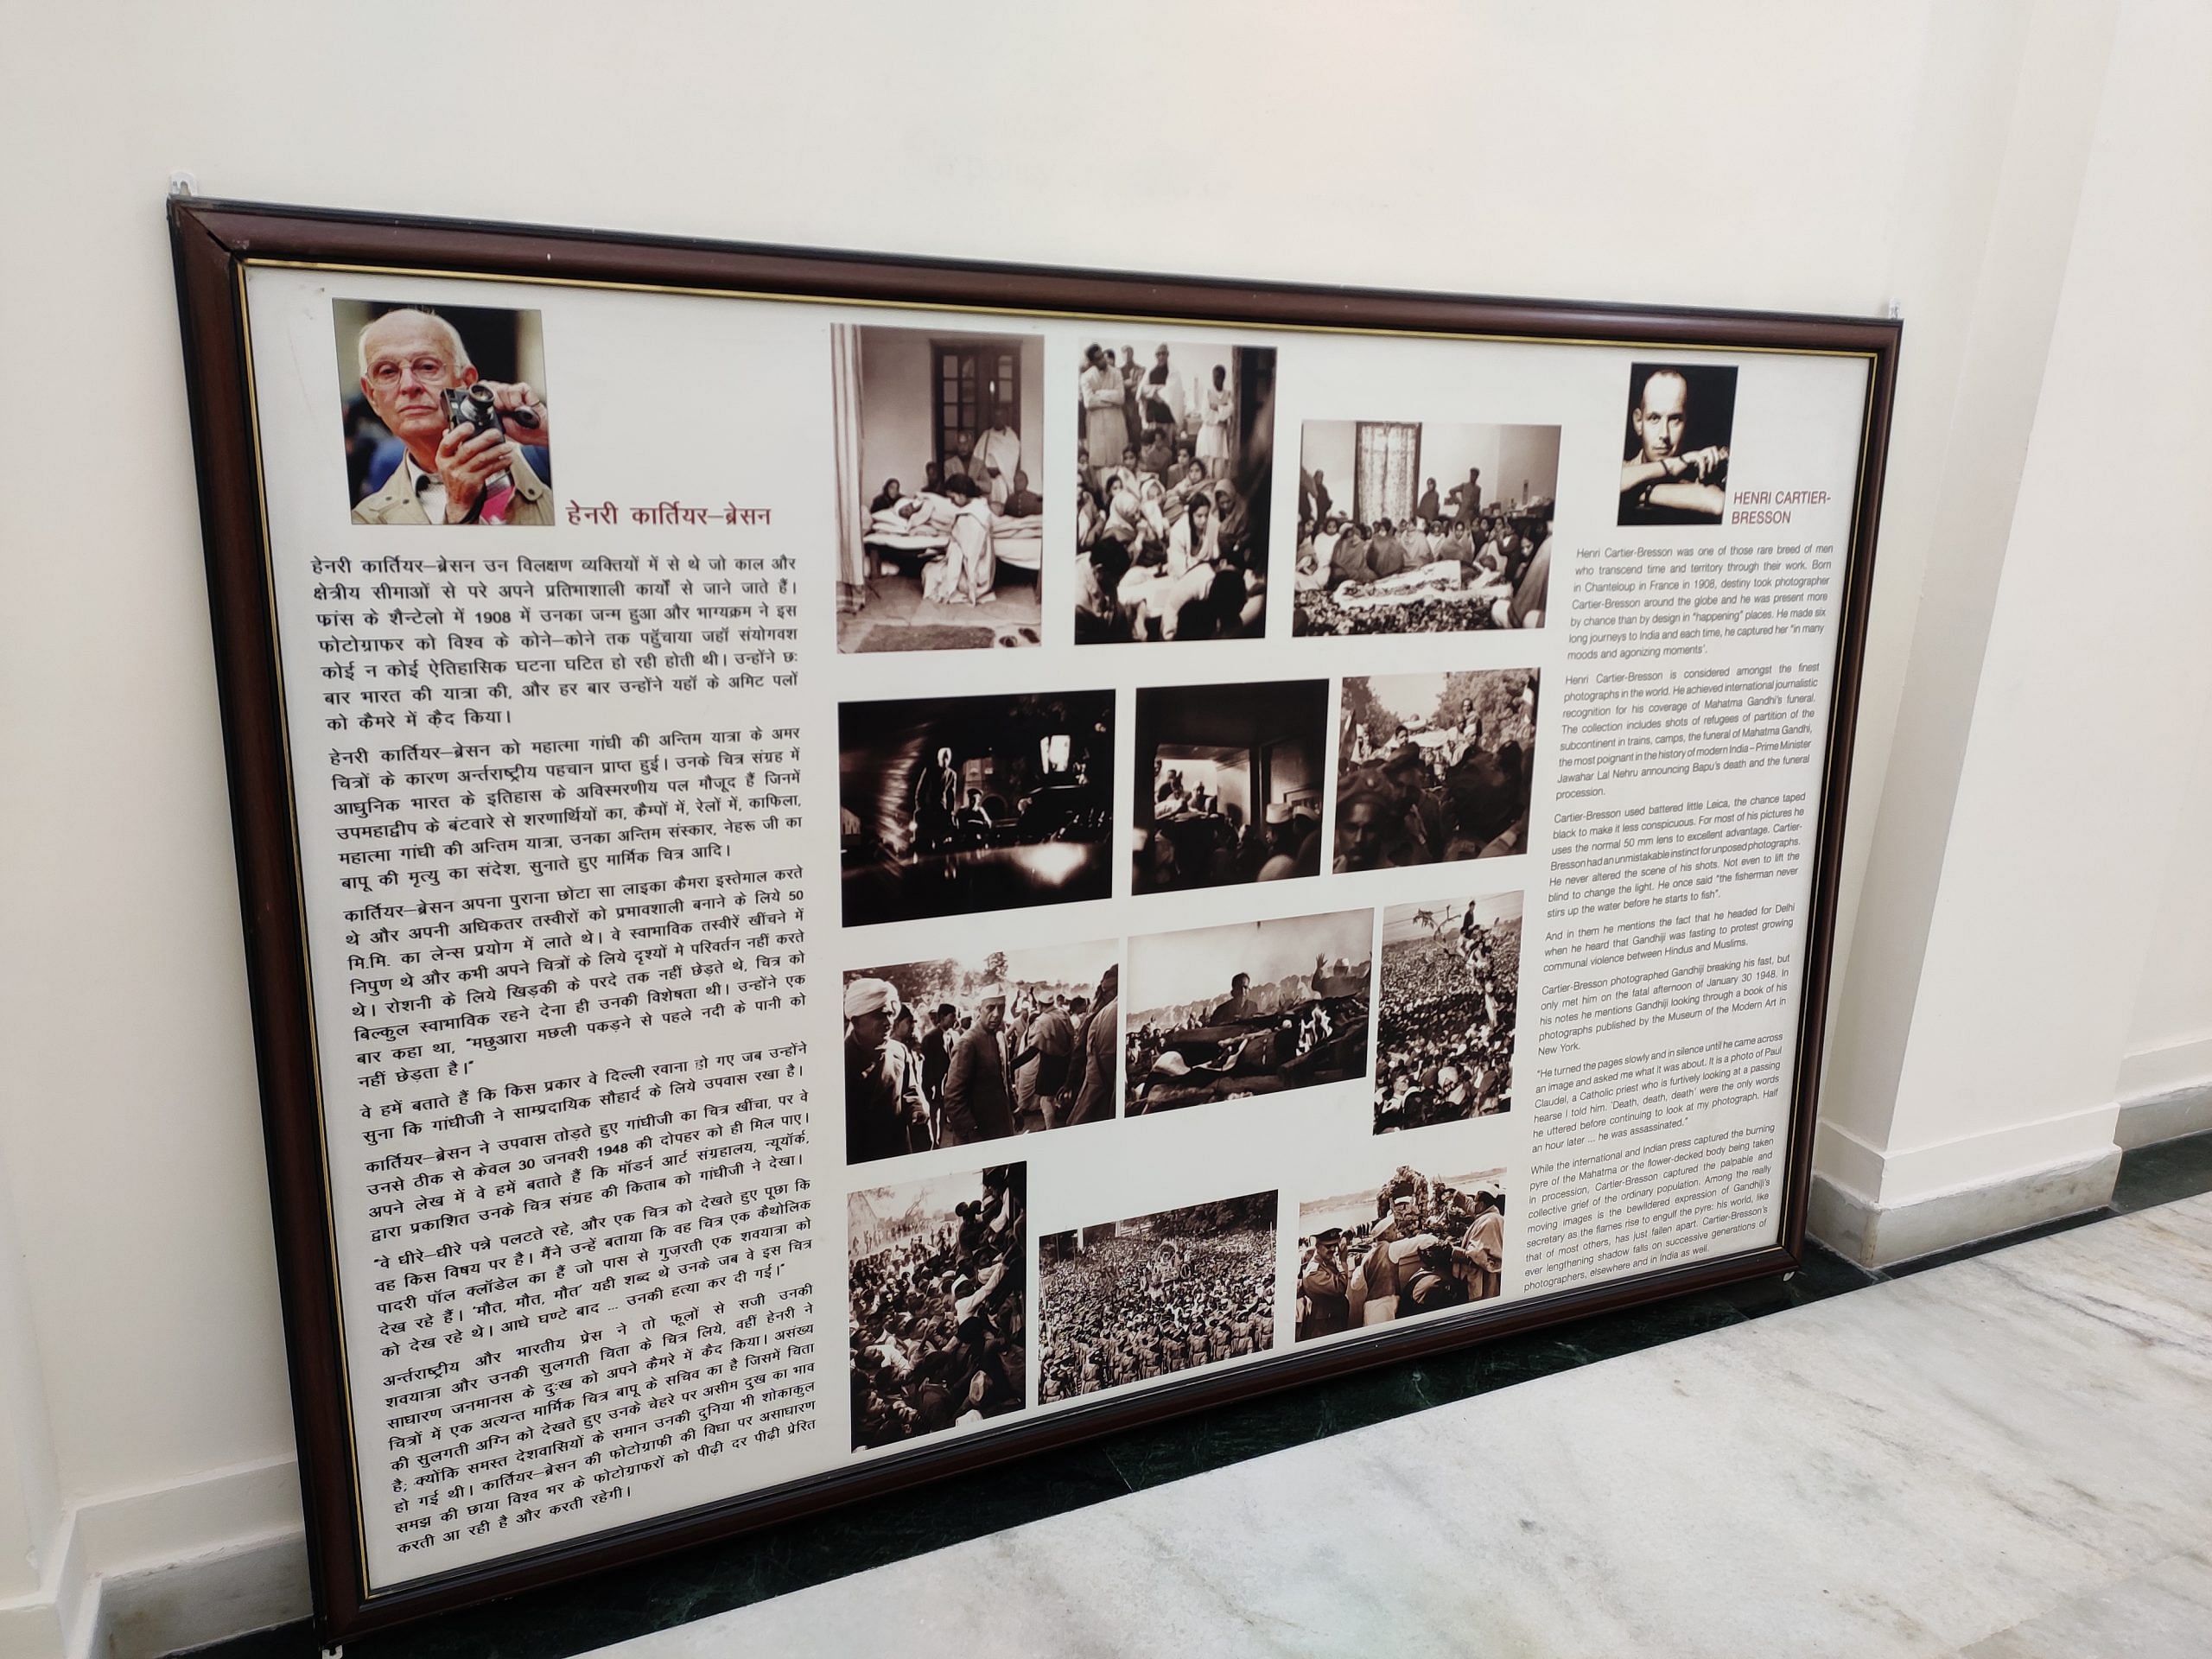 The original panel of the images taken by Henri Cartier Bresson in the aftermath of Gandhi's assassination